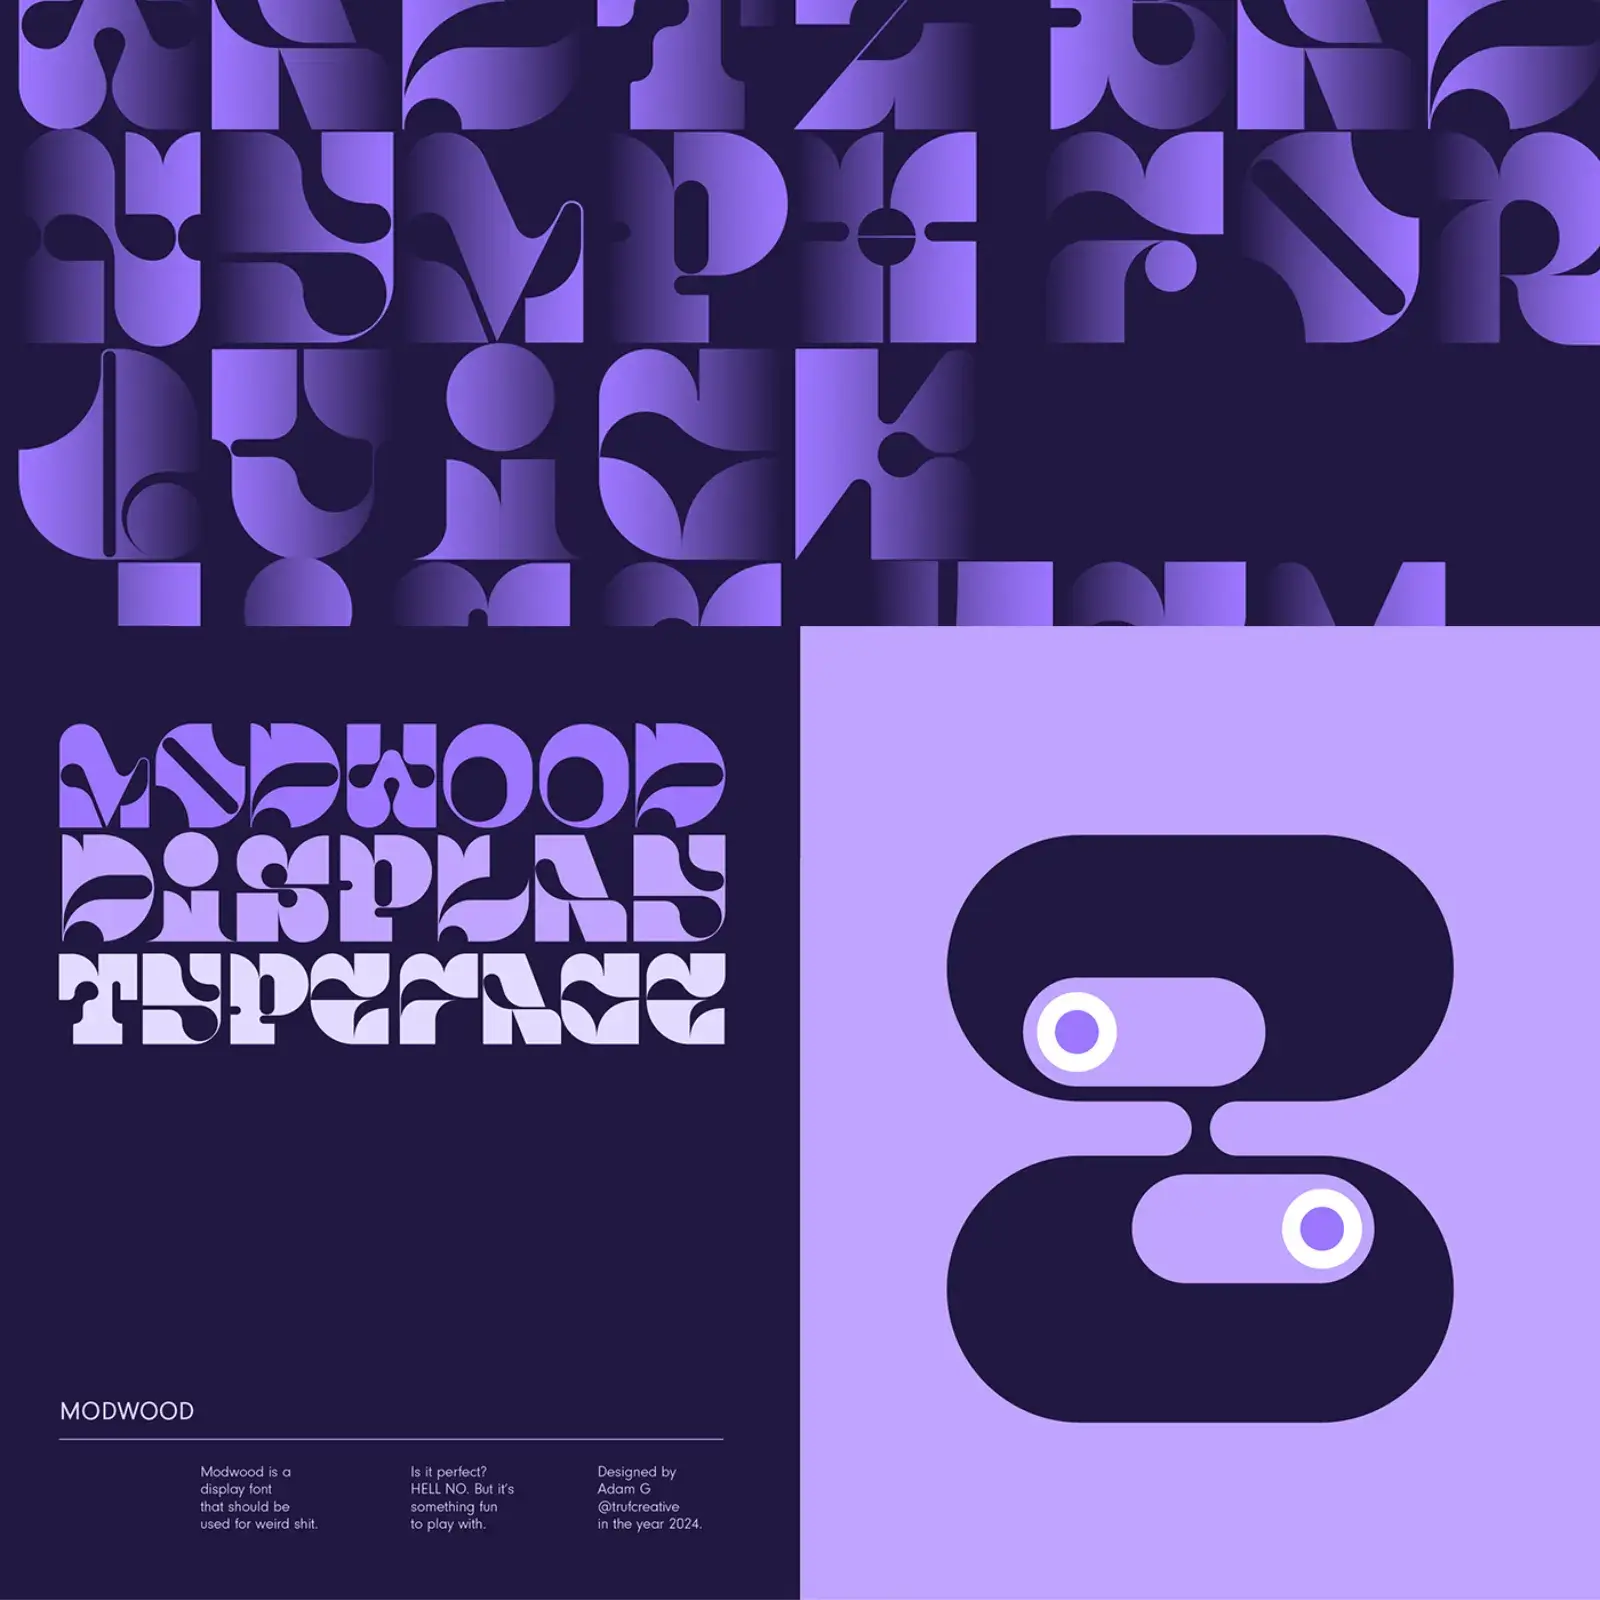 Modwood Display Font: A Fusion of Typography Design